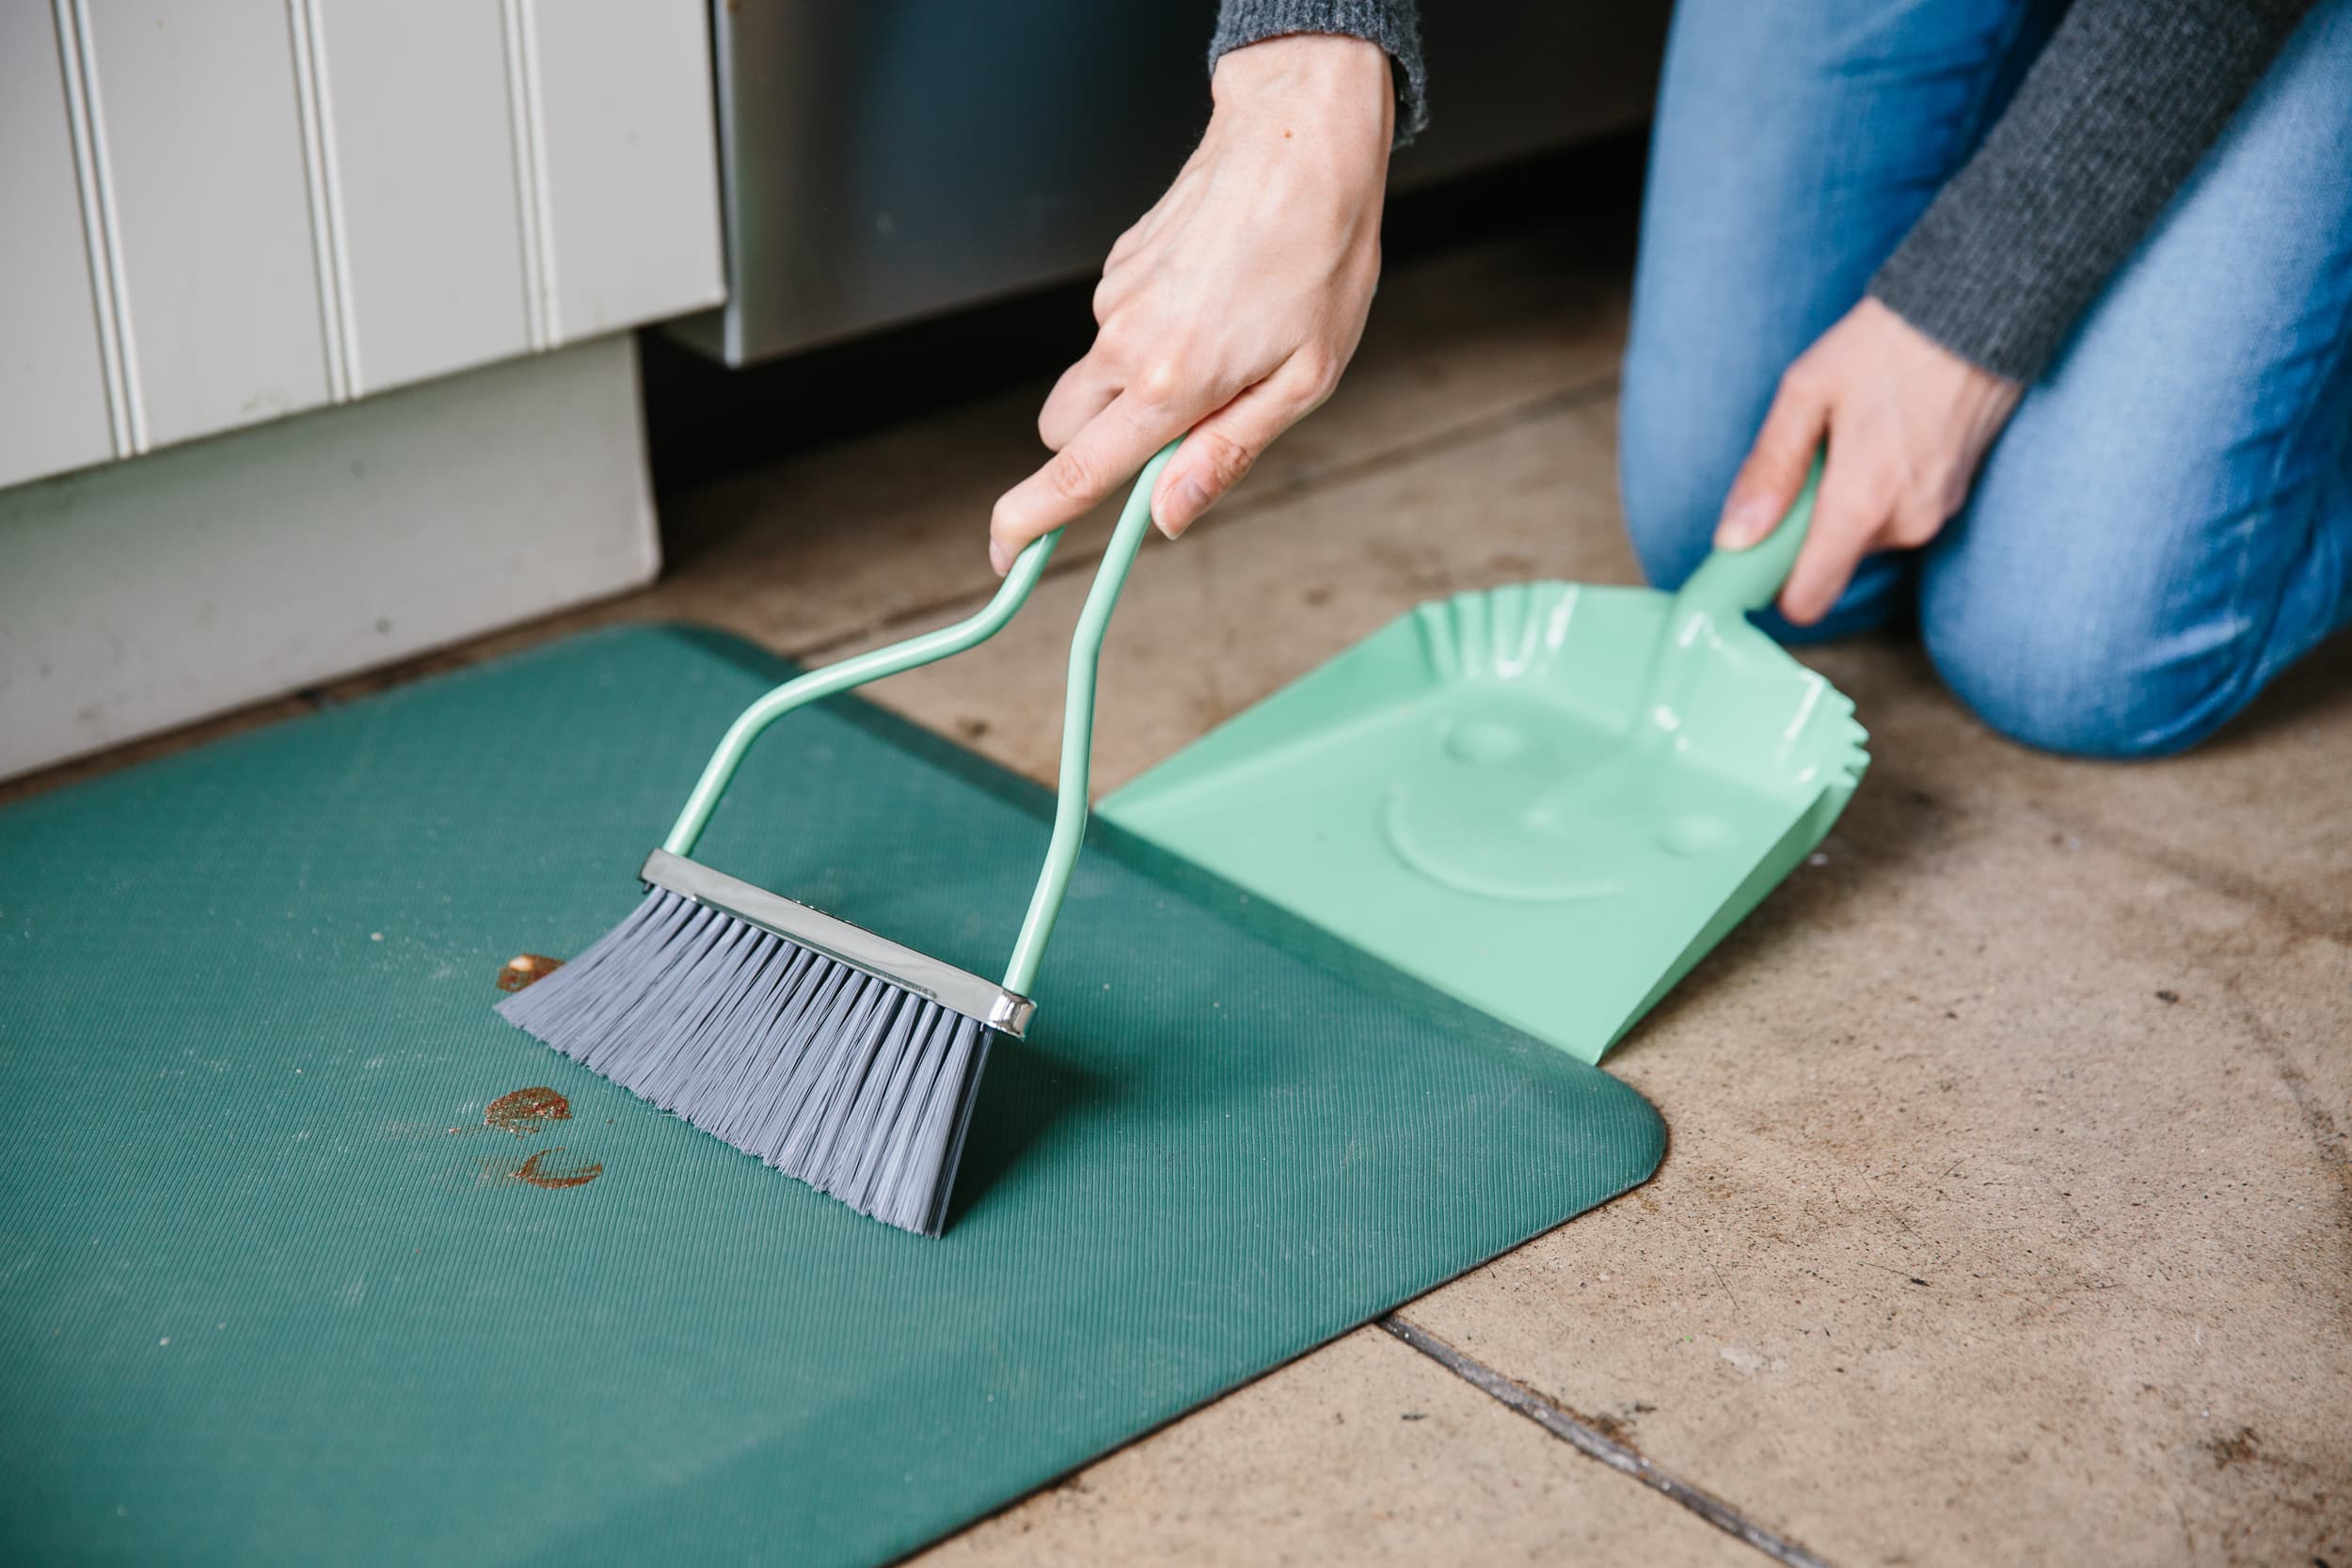 Tips for Cleaning Your Kitchen Anti-Fatigue Mats